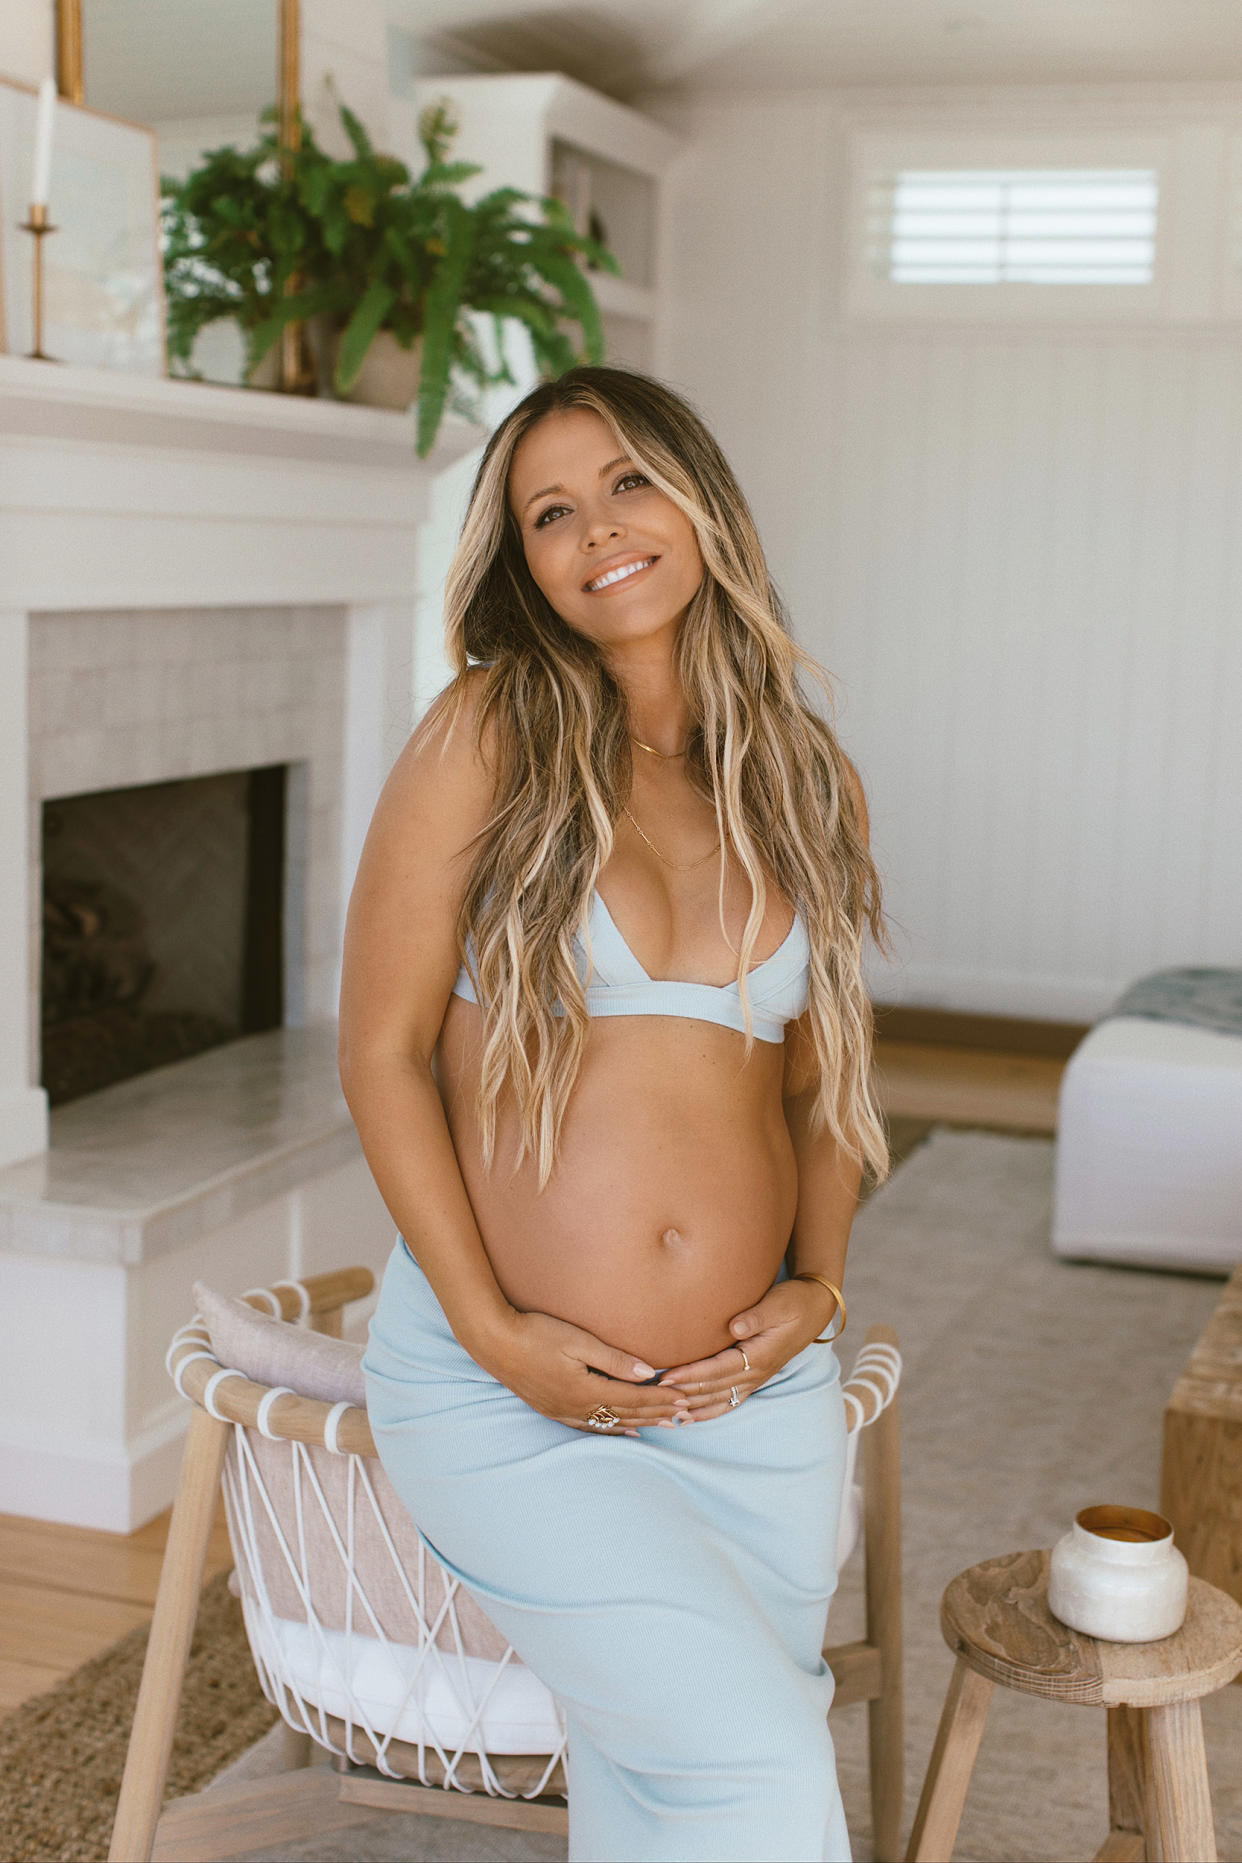 Katrina Scott told TODAY she is incredibly honored to be the first visibly pregnant model in the pages of Sports Illustrated. (Nicole Hill)